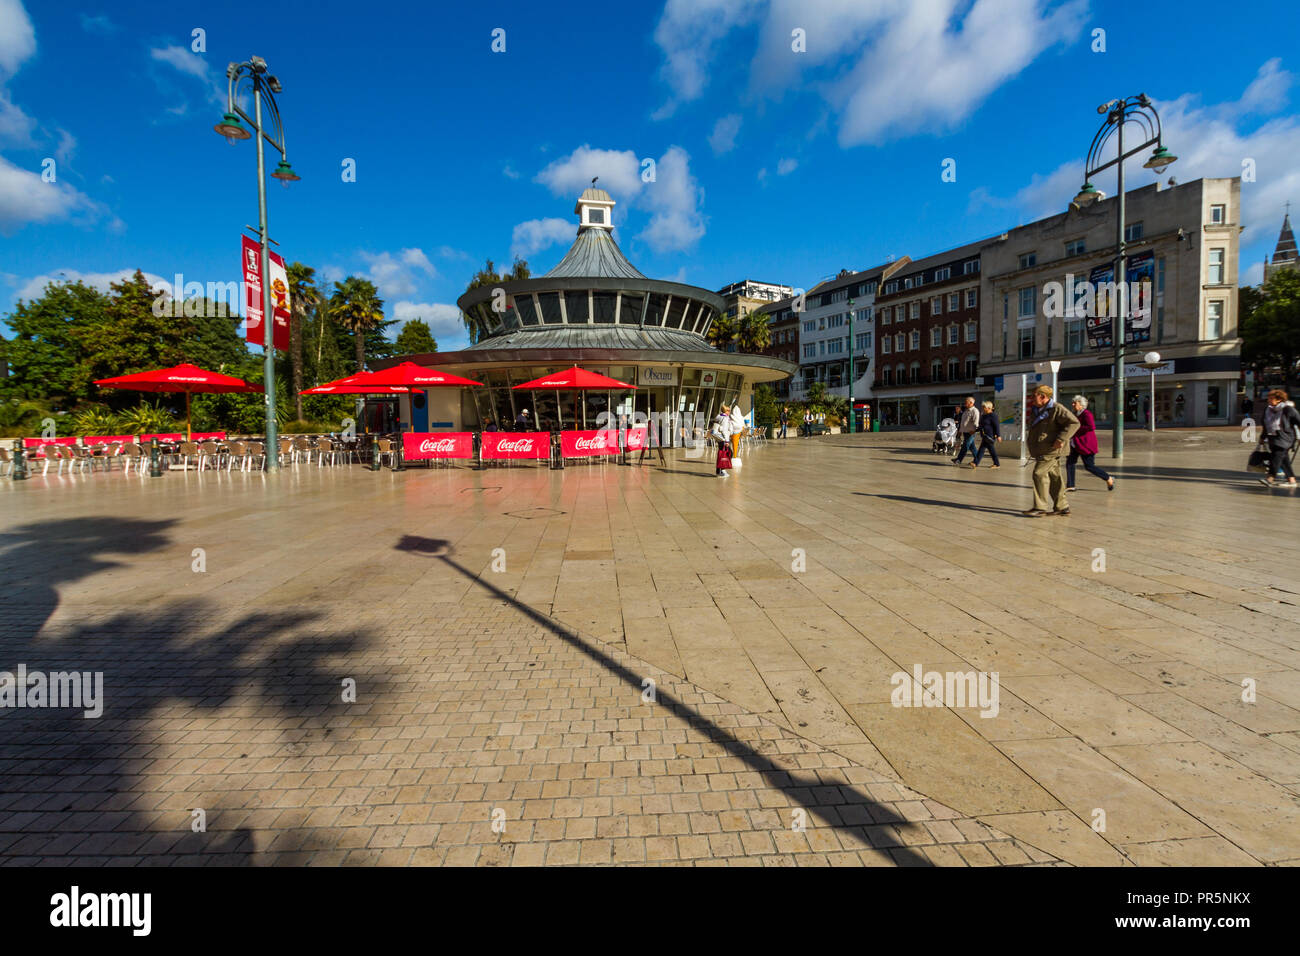 Bournemouth, United Kingdom – Bournemouth Square pedestrianised area on September 21 2018 in Bournemouth. Stock Photo